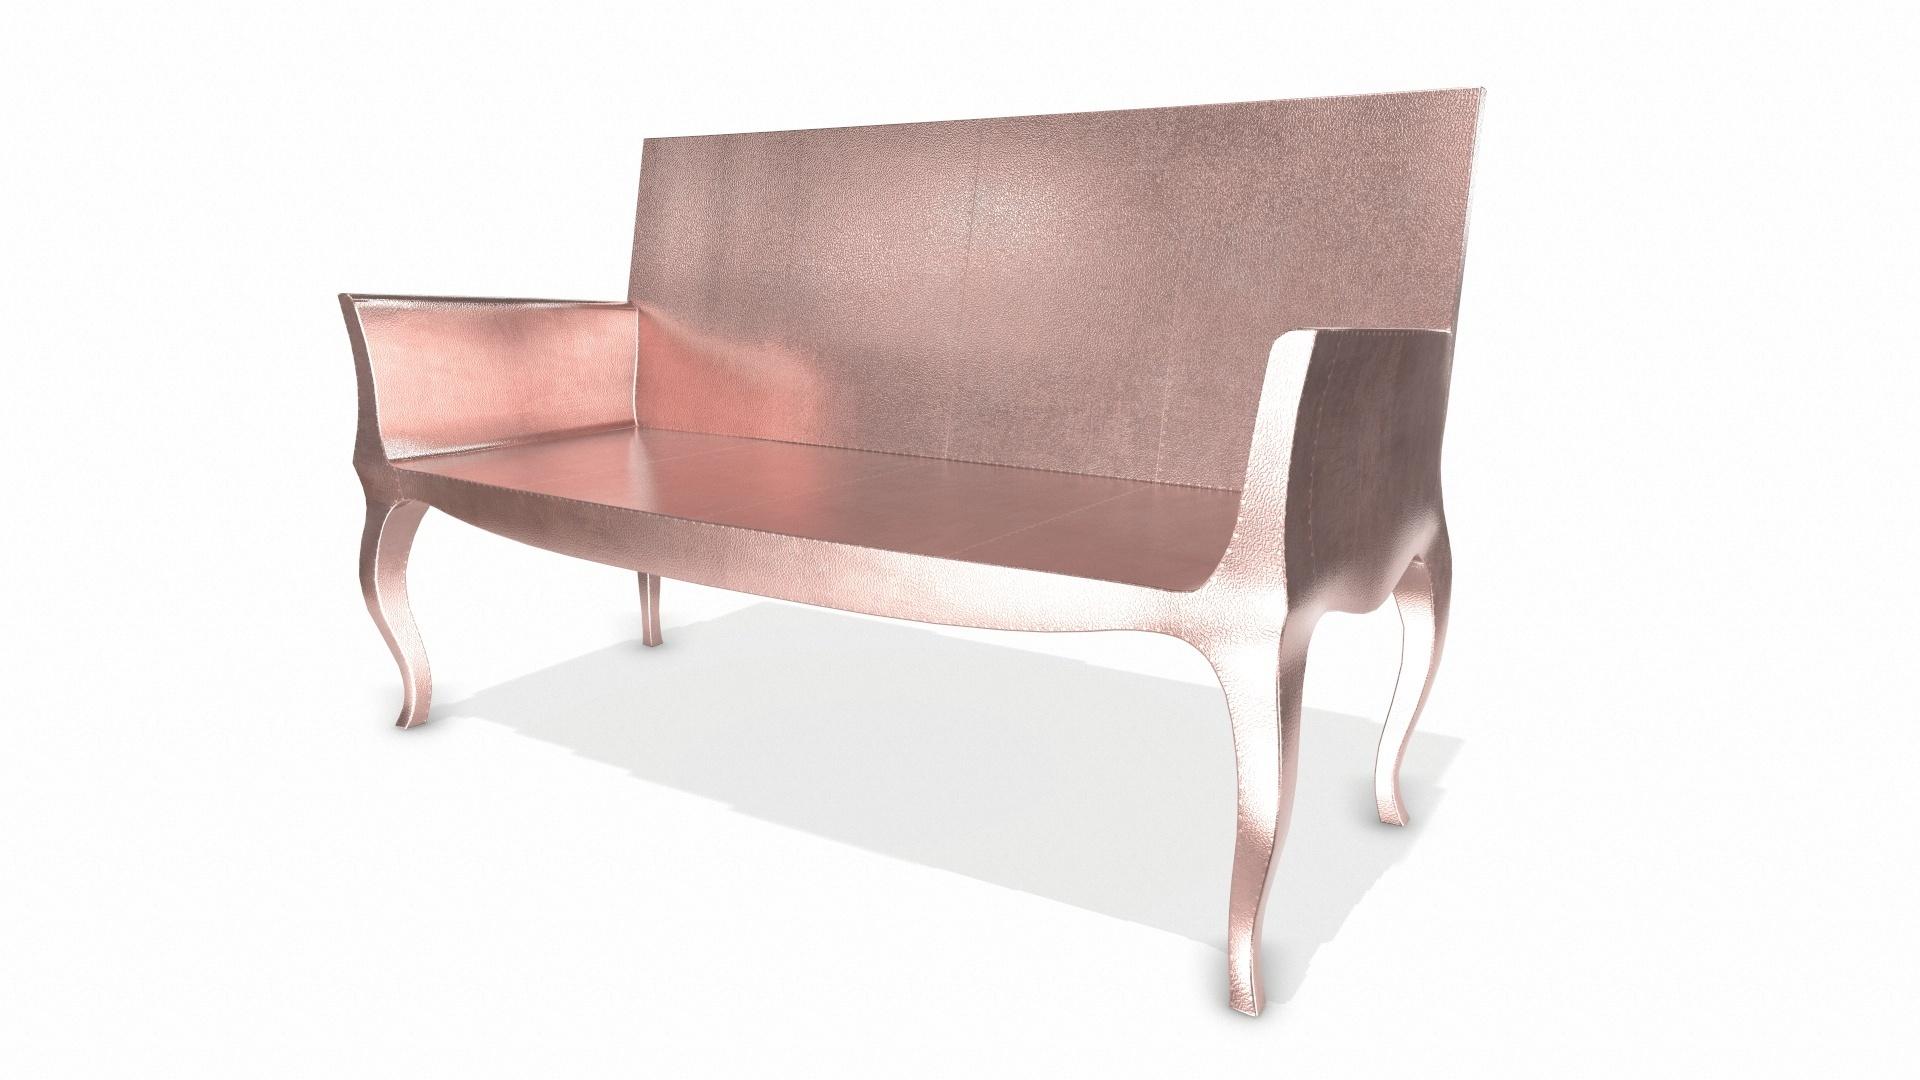 American Louise Settee Art Deco Lounge Chairs in Fine Hammered Copper by Paul Mathieu For Sale